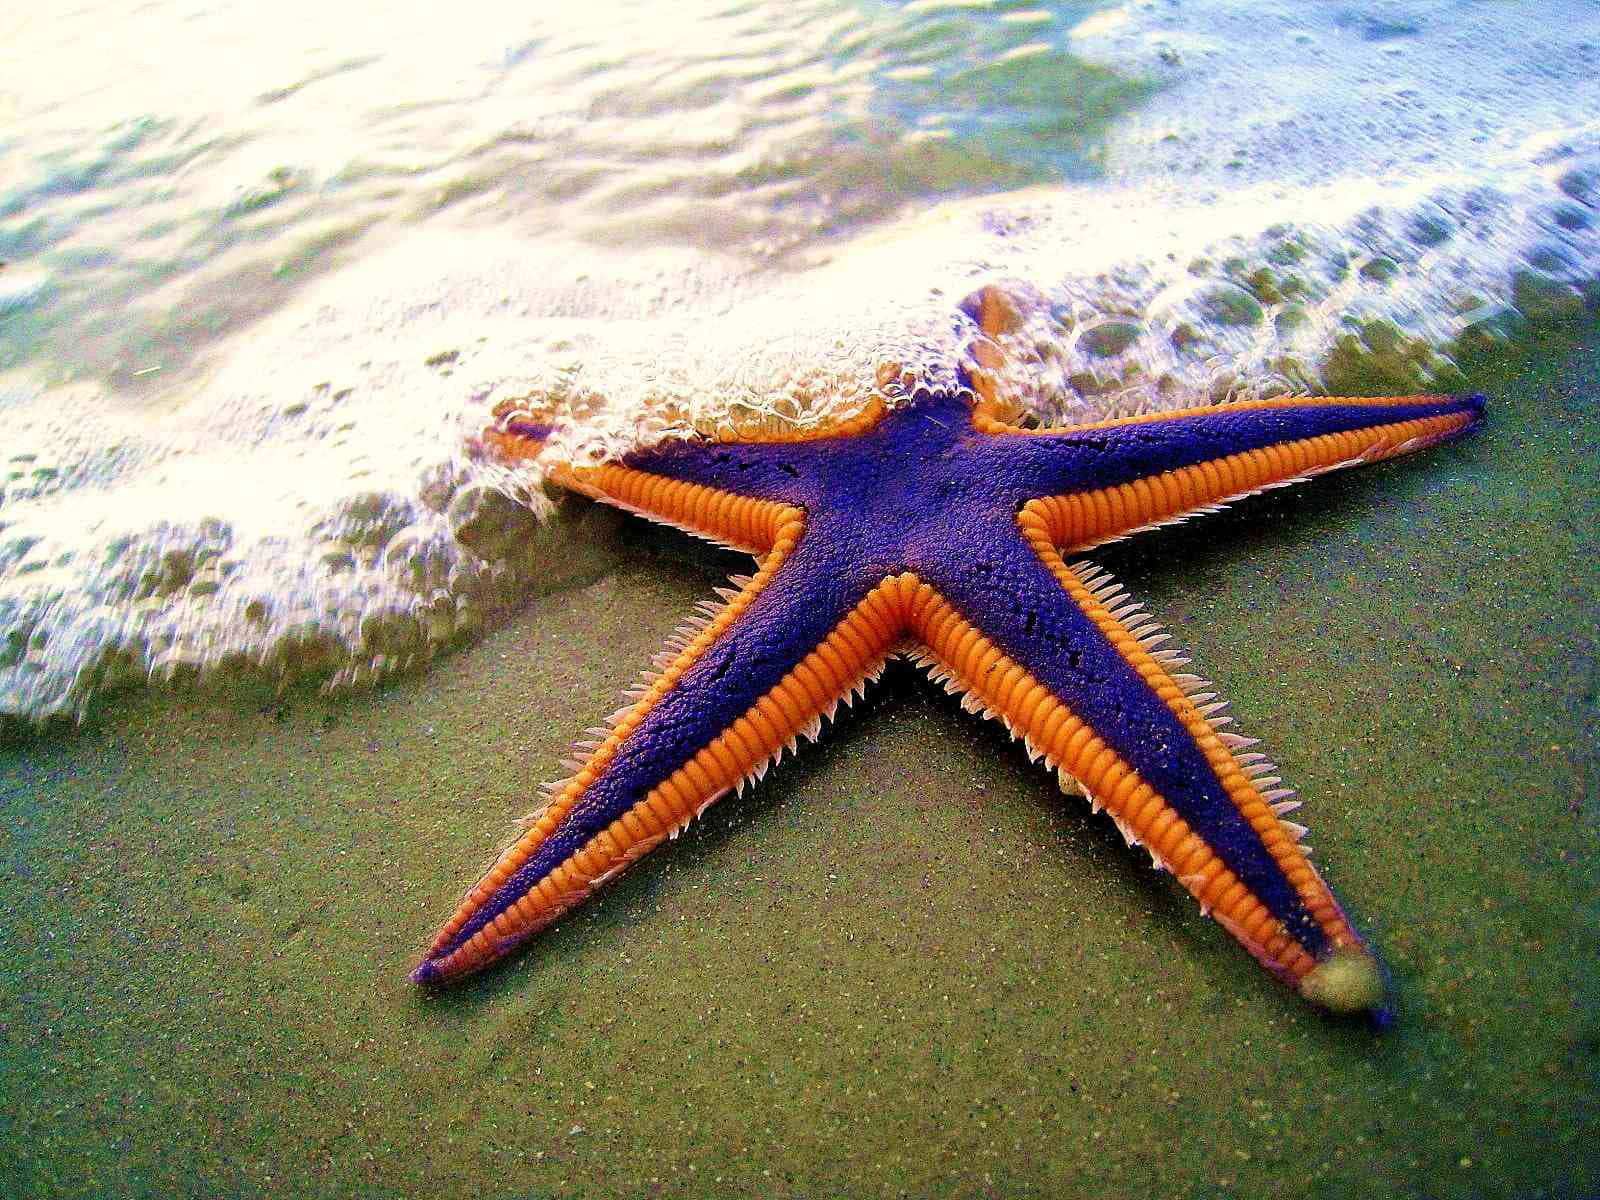 Glinting in the Sunlight, a Starfish Crawling Across a Rocky Coast